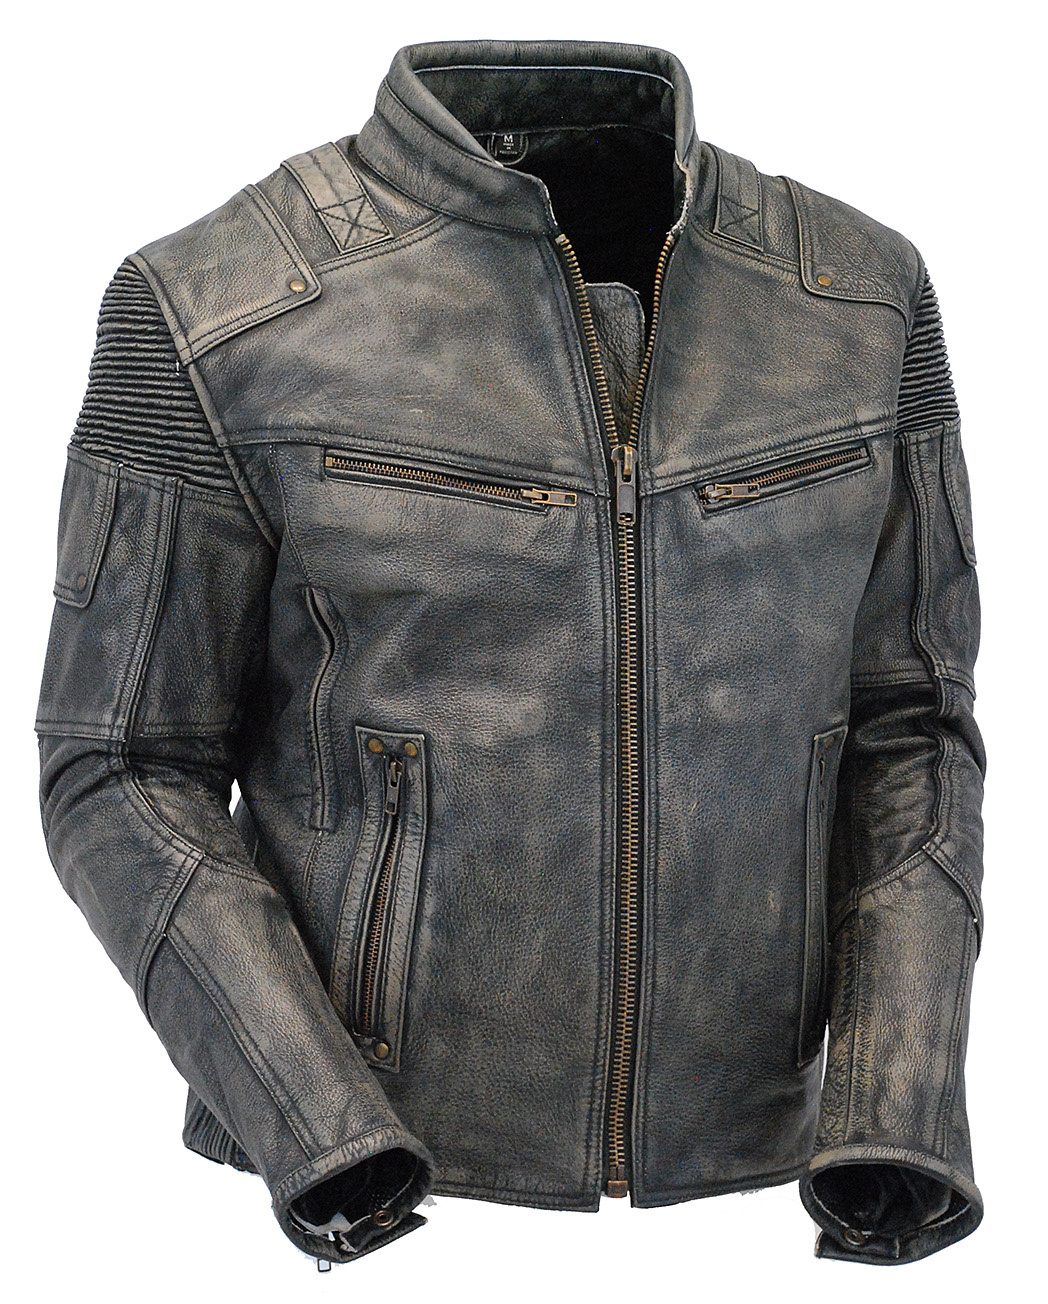 Vented Racer Leather Jacket with Convertible Collar - MJ786-DL